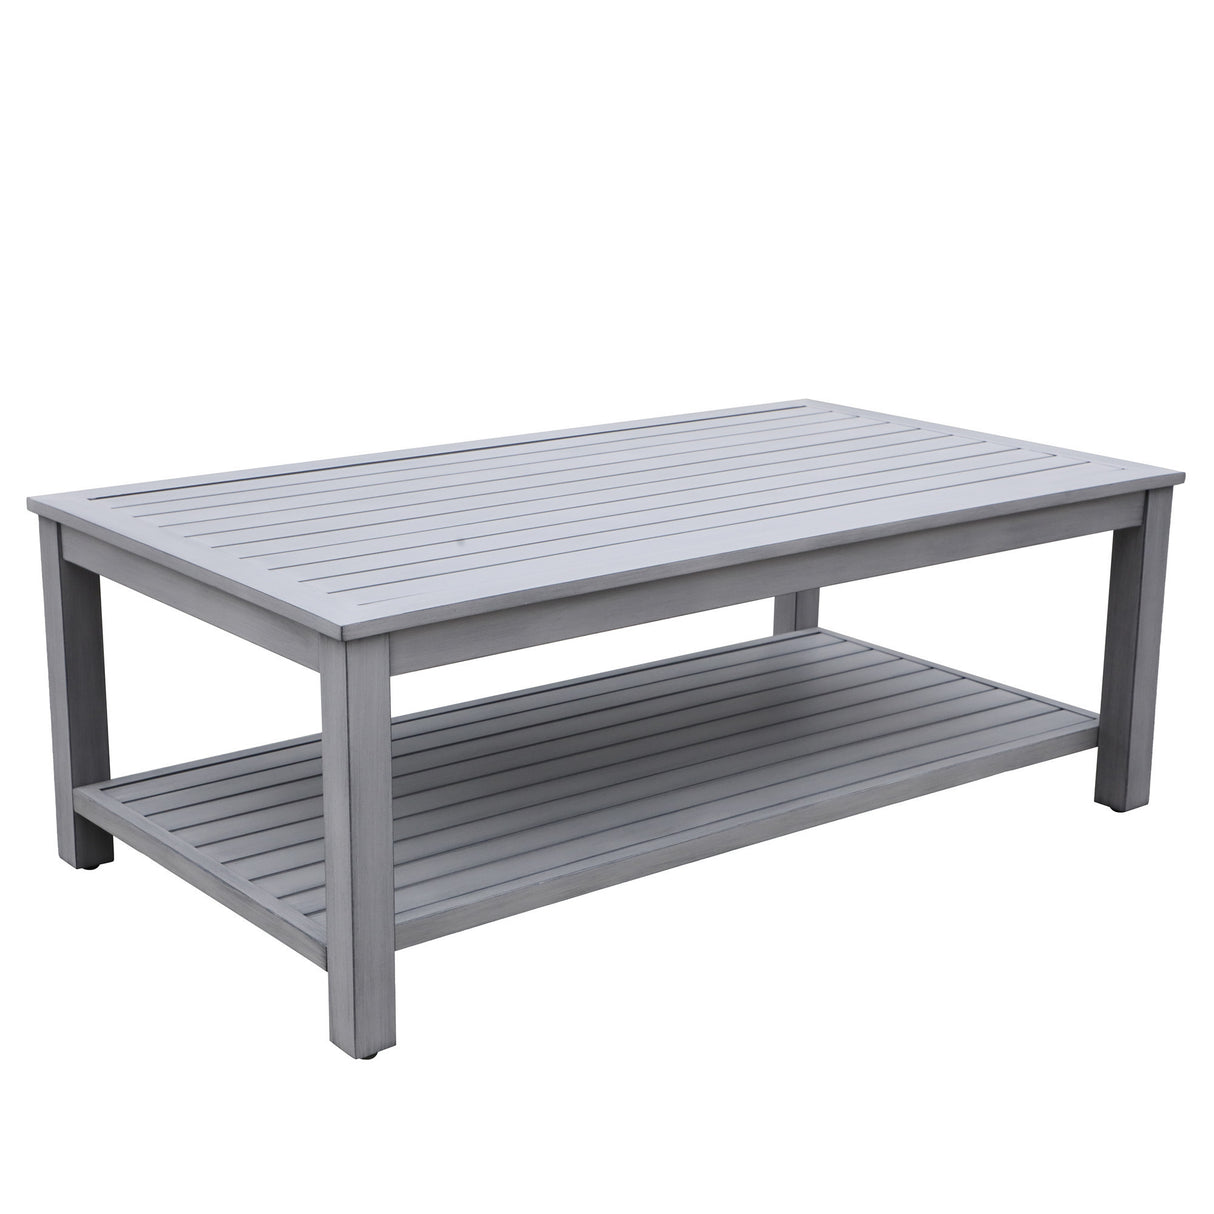 Octavia All-Weather Outdoor, Patio 7-Piece Aluminum Deep Seating Set with Water-Repellent Cushions for Deck, Backyards, Gardens, Lawns, Poolside, and Beach.